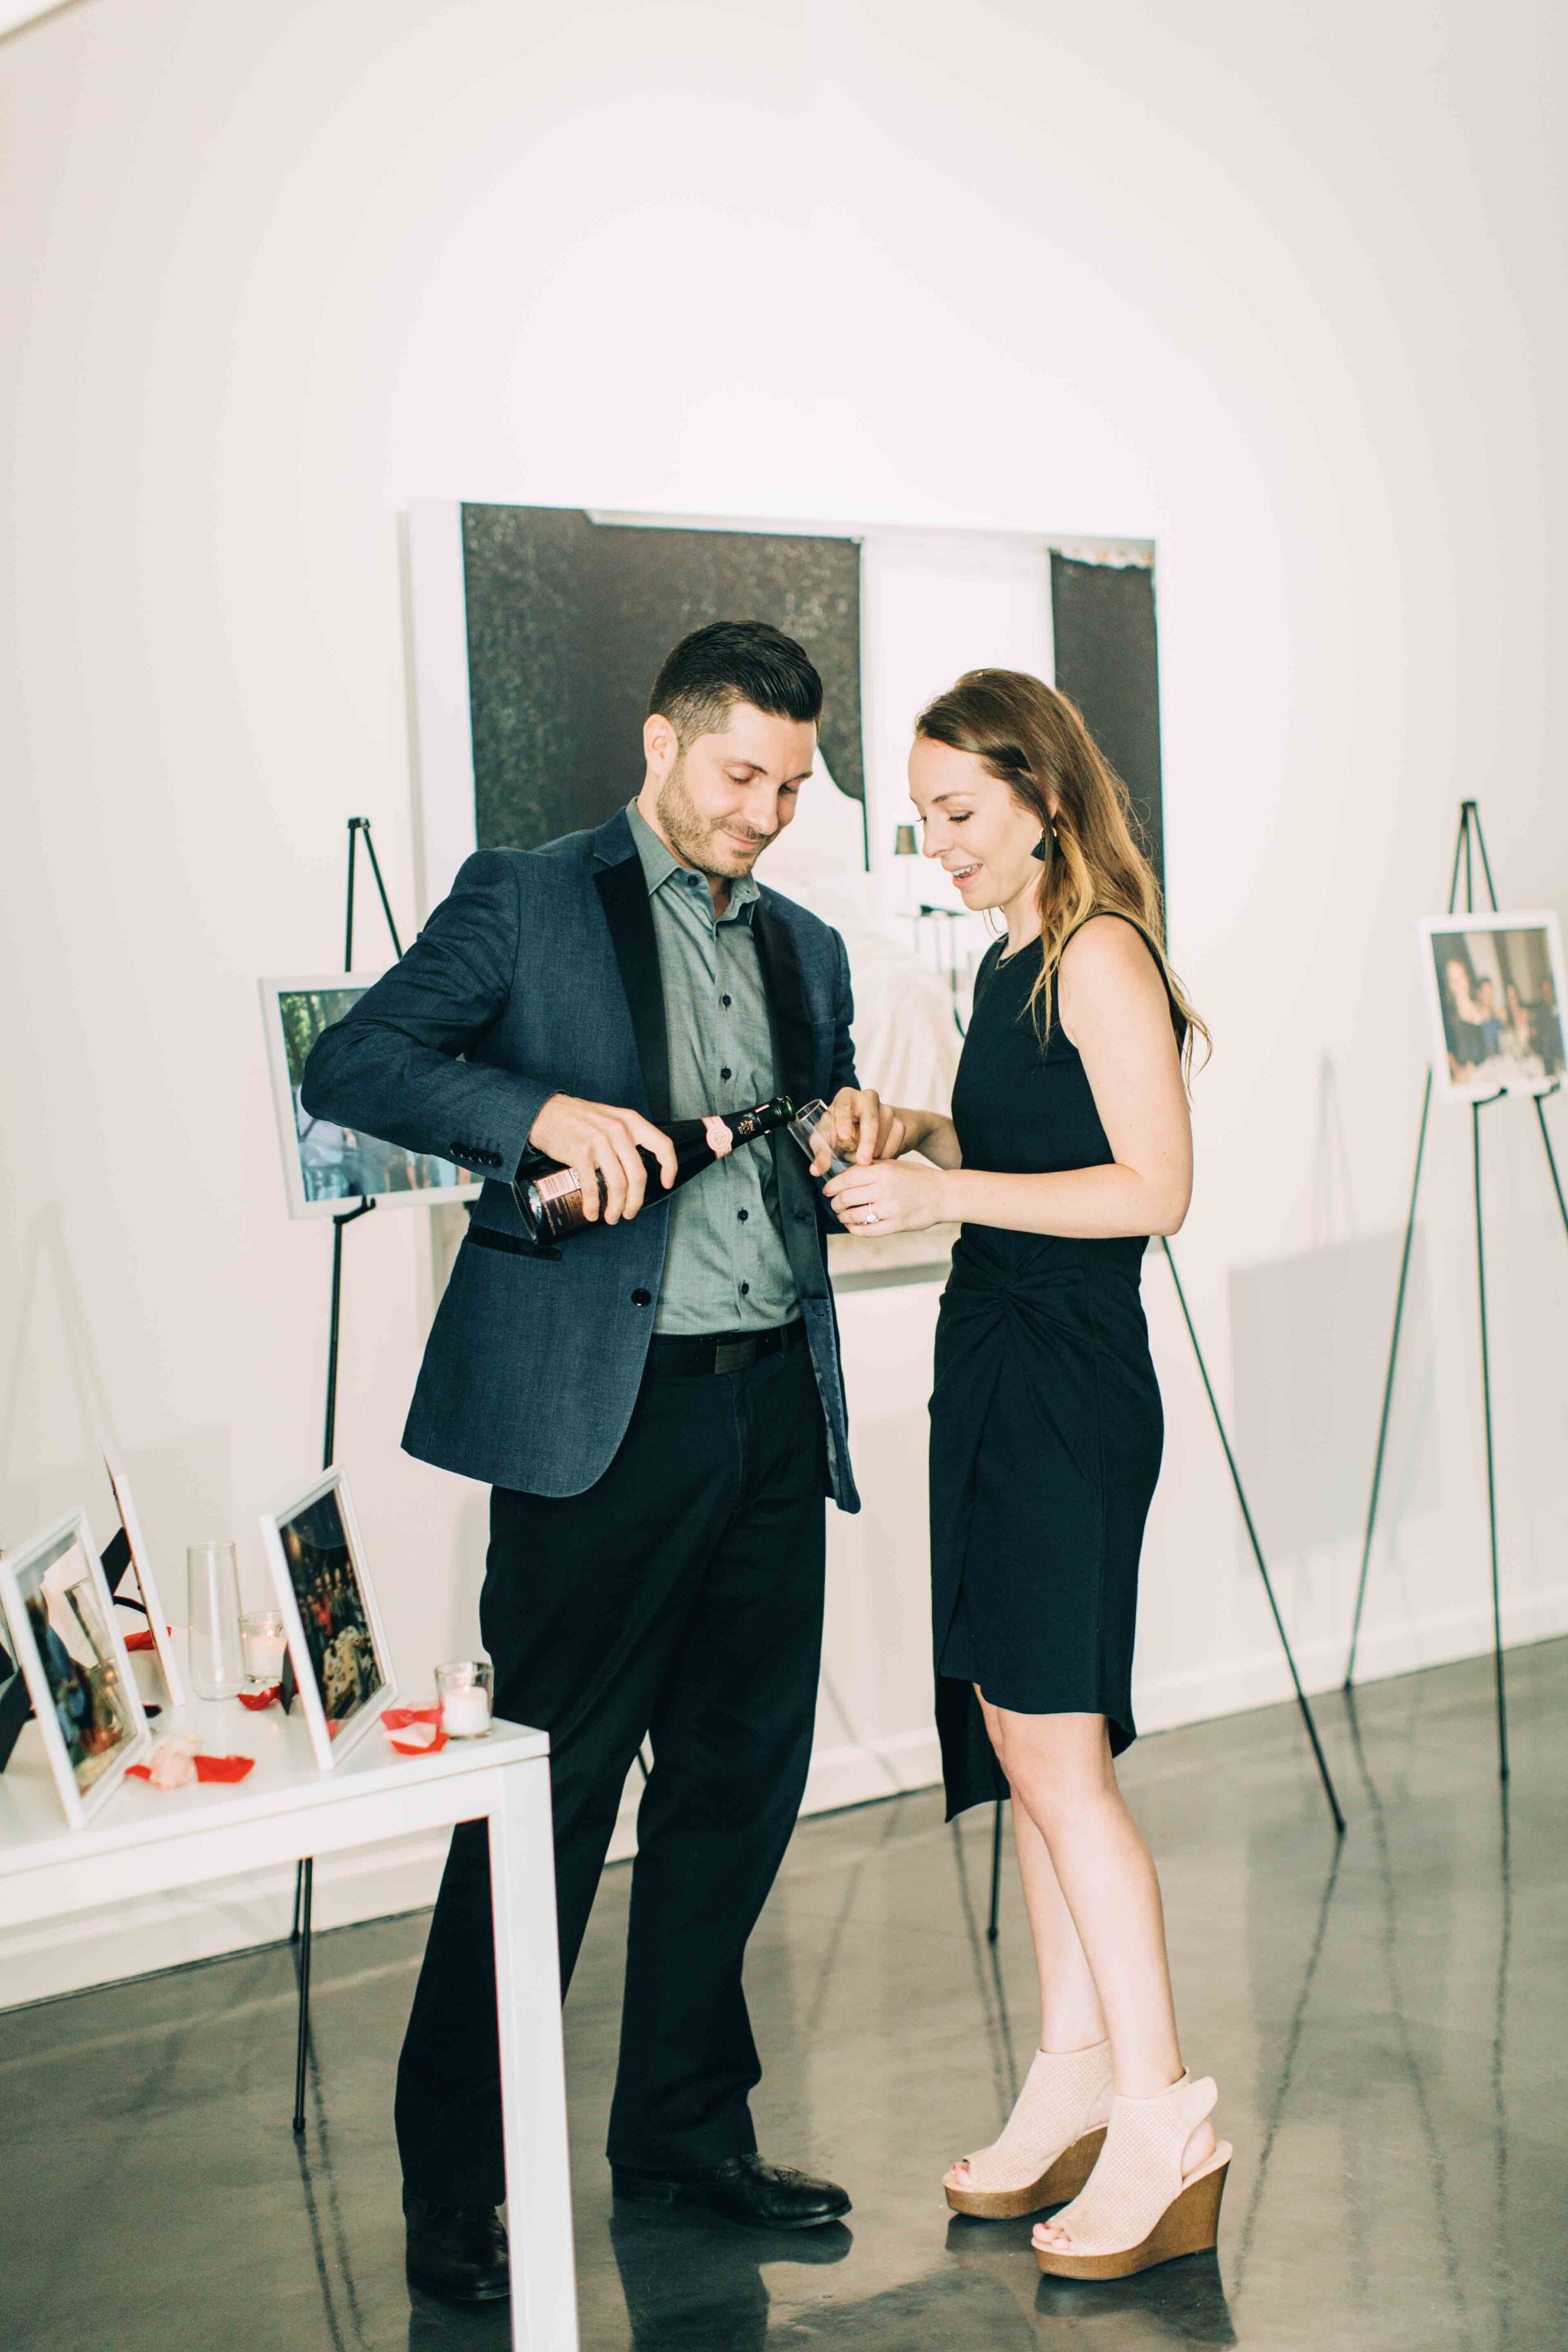 Couple celebrates with champagne at engagement